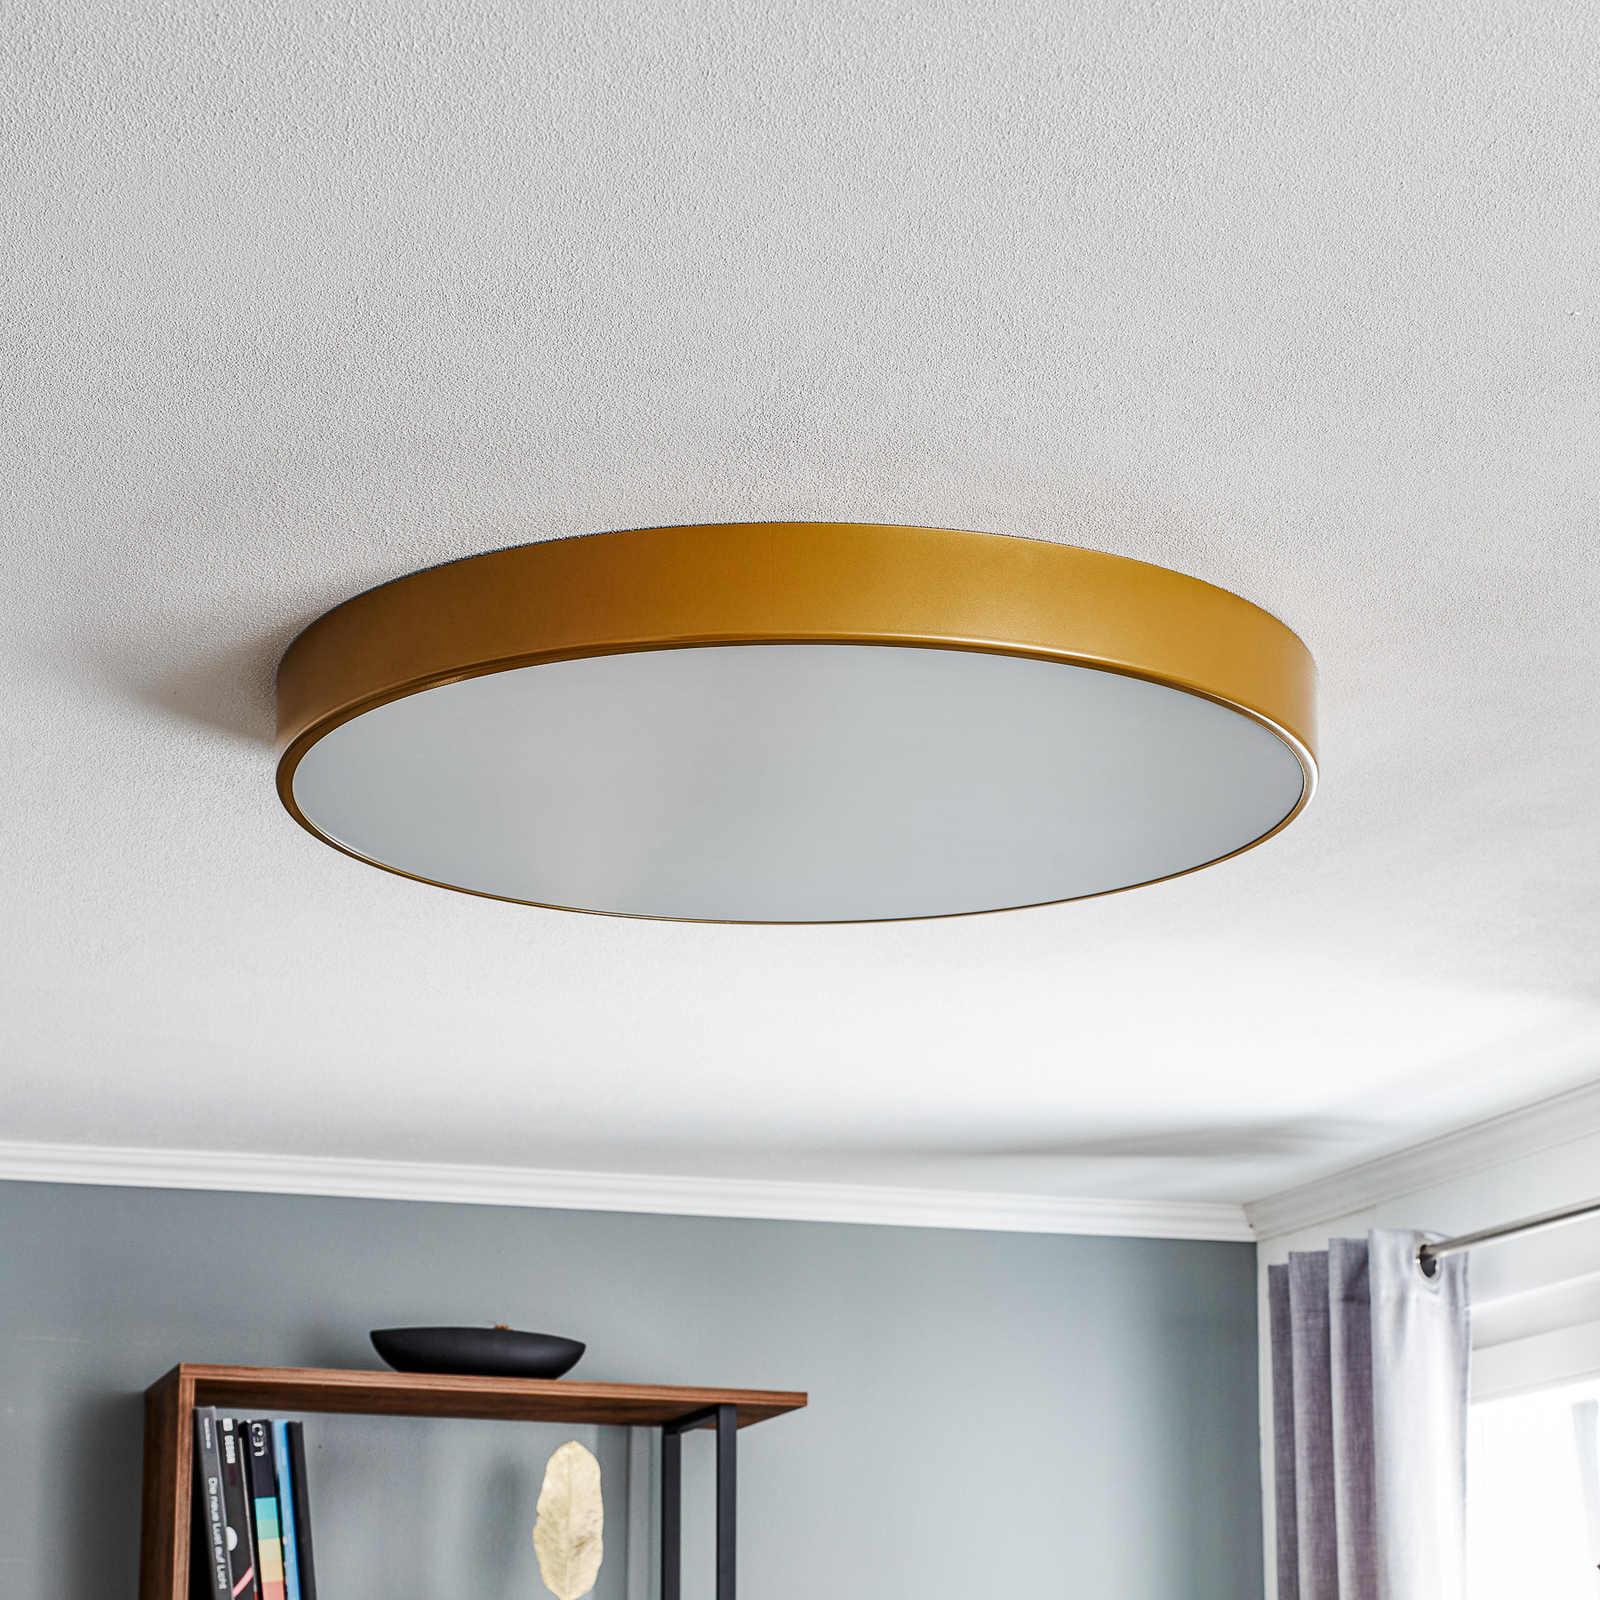 Cleo ceiling light in gold with diffuser, Ø 78 cm